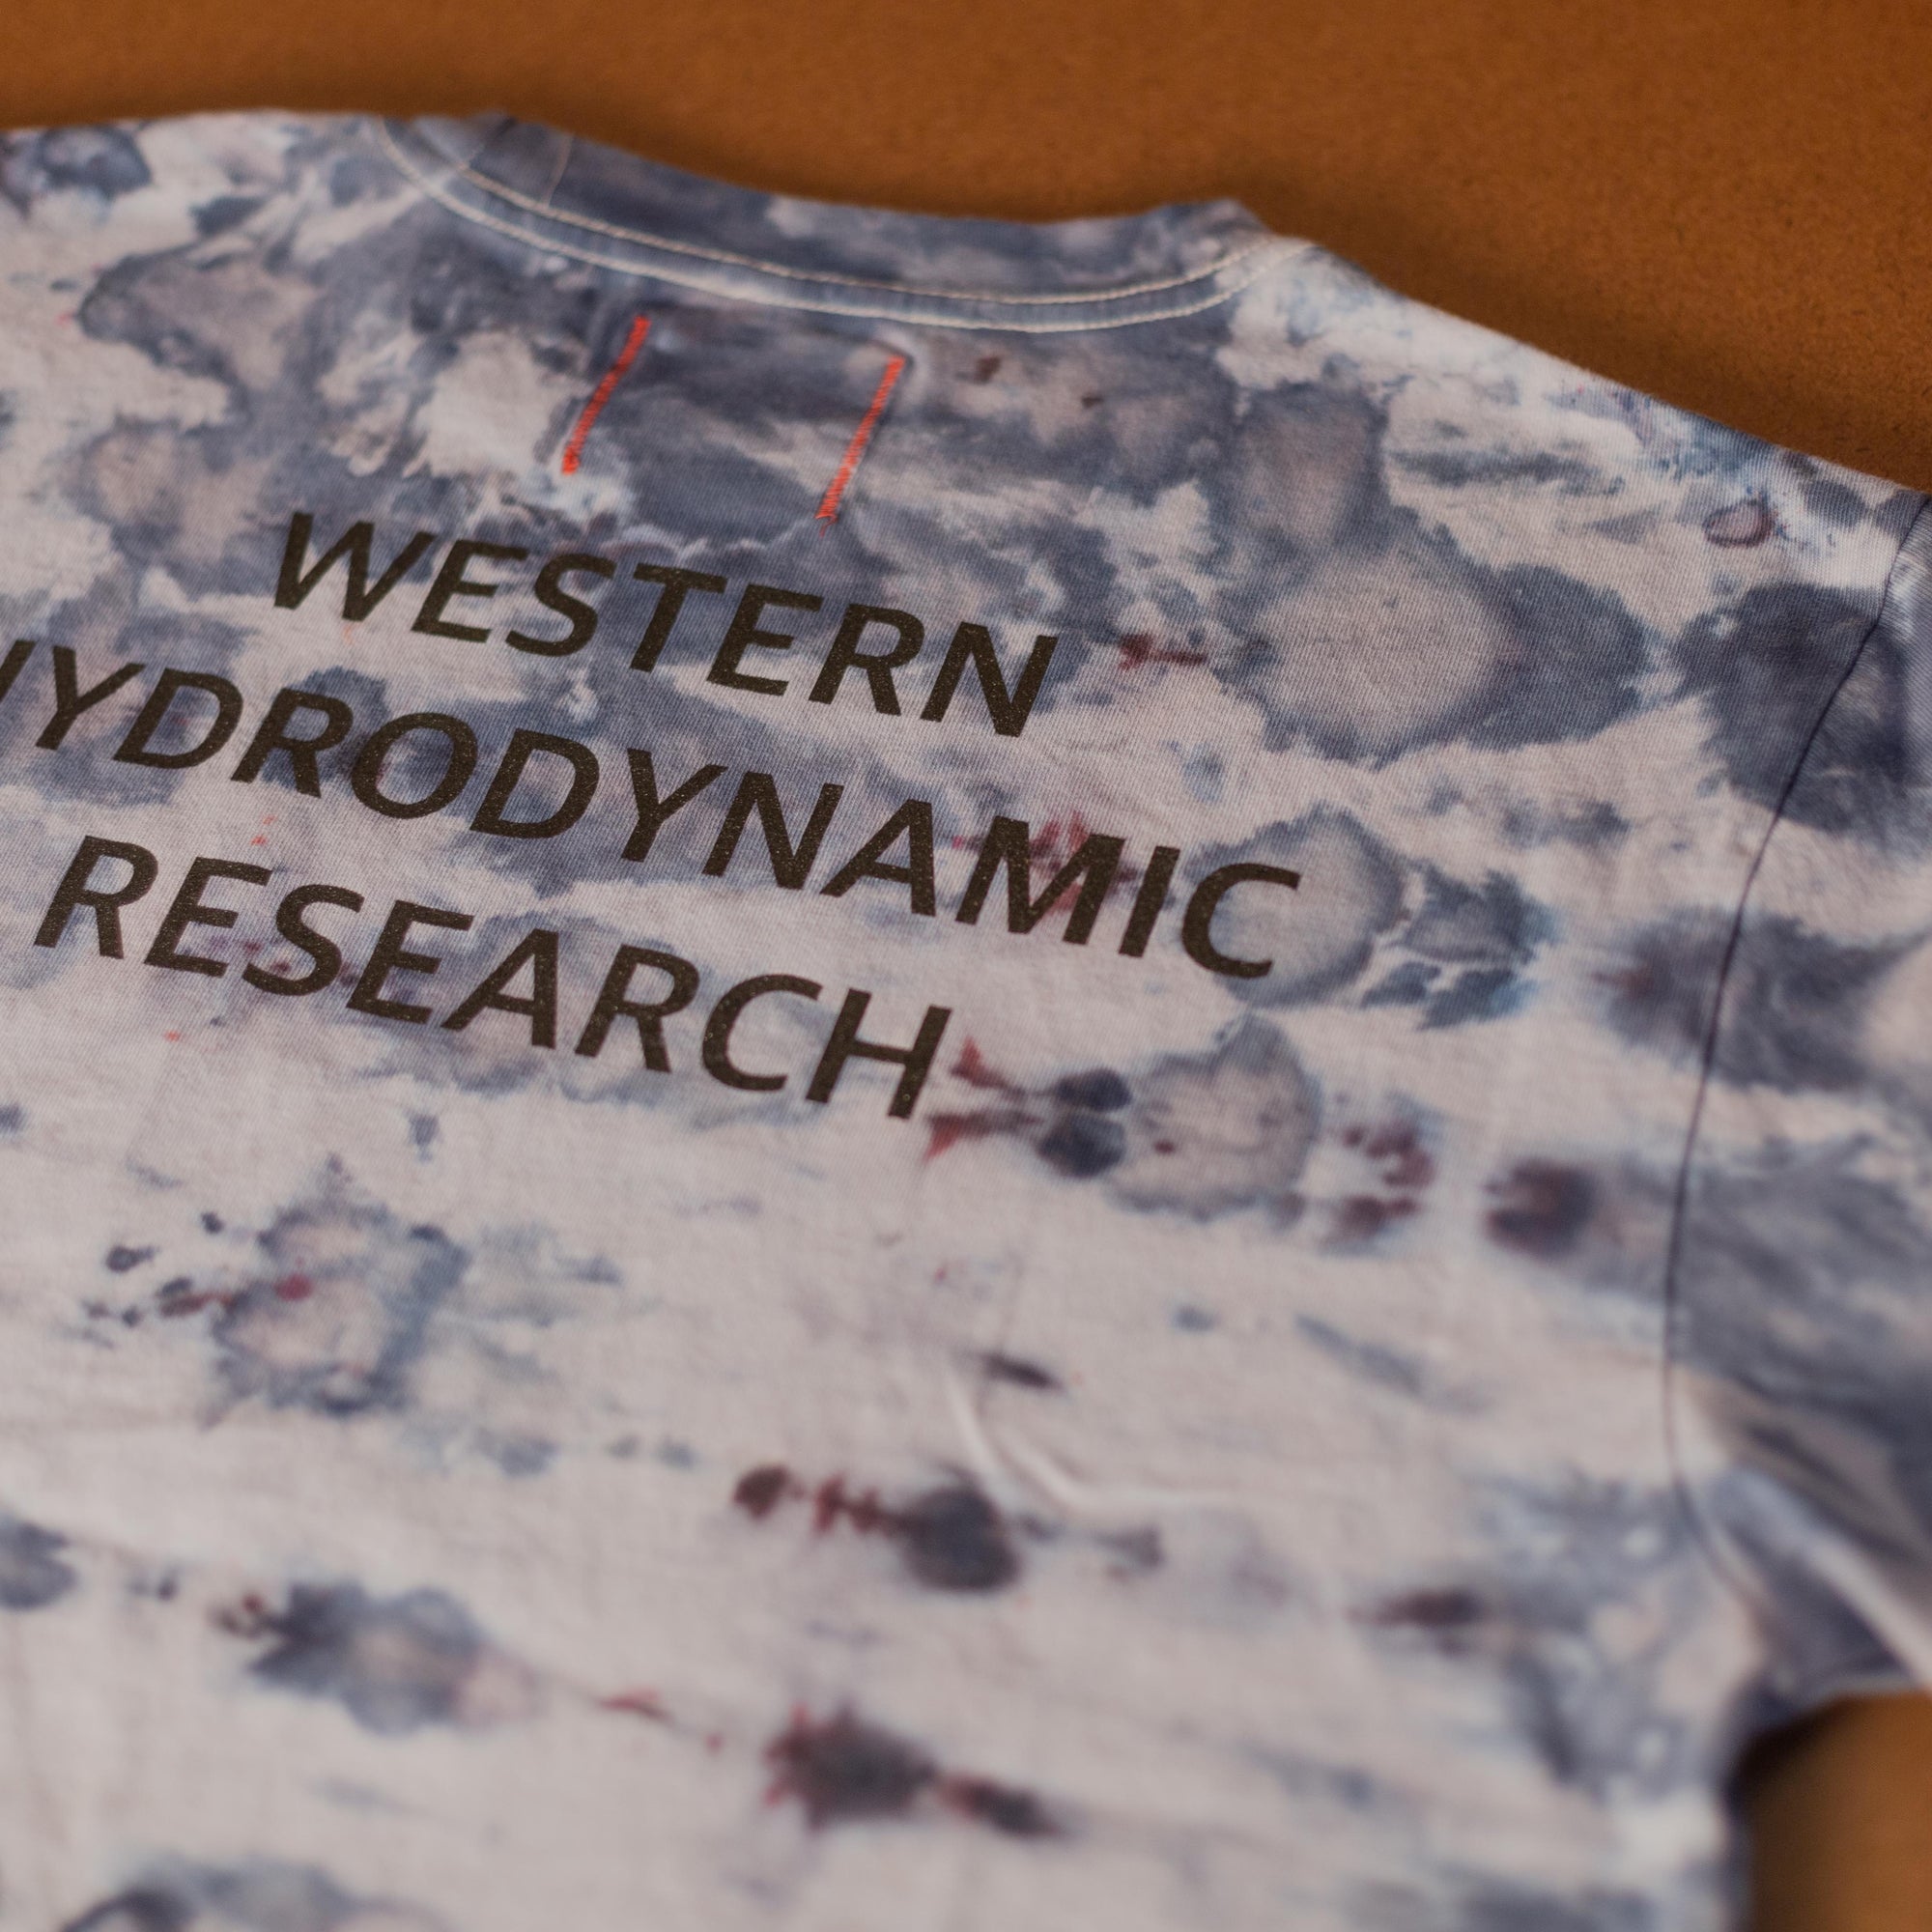 Western Hydrodynamic Research - Worker Tee (Ice Dye) back with brown background